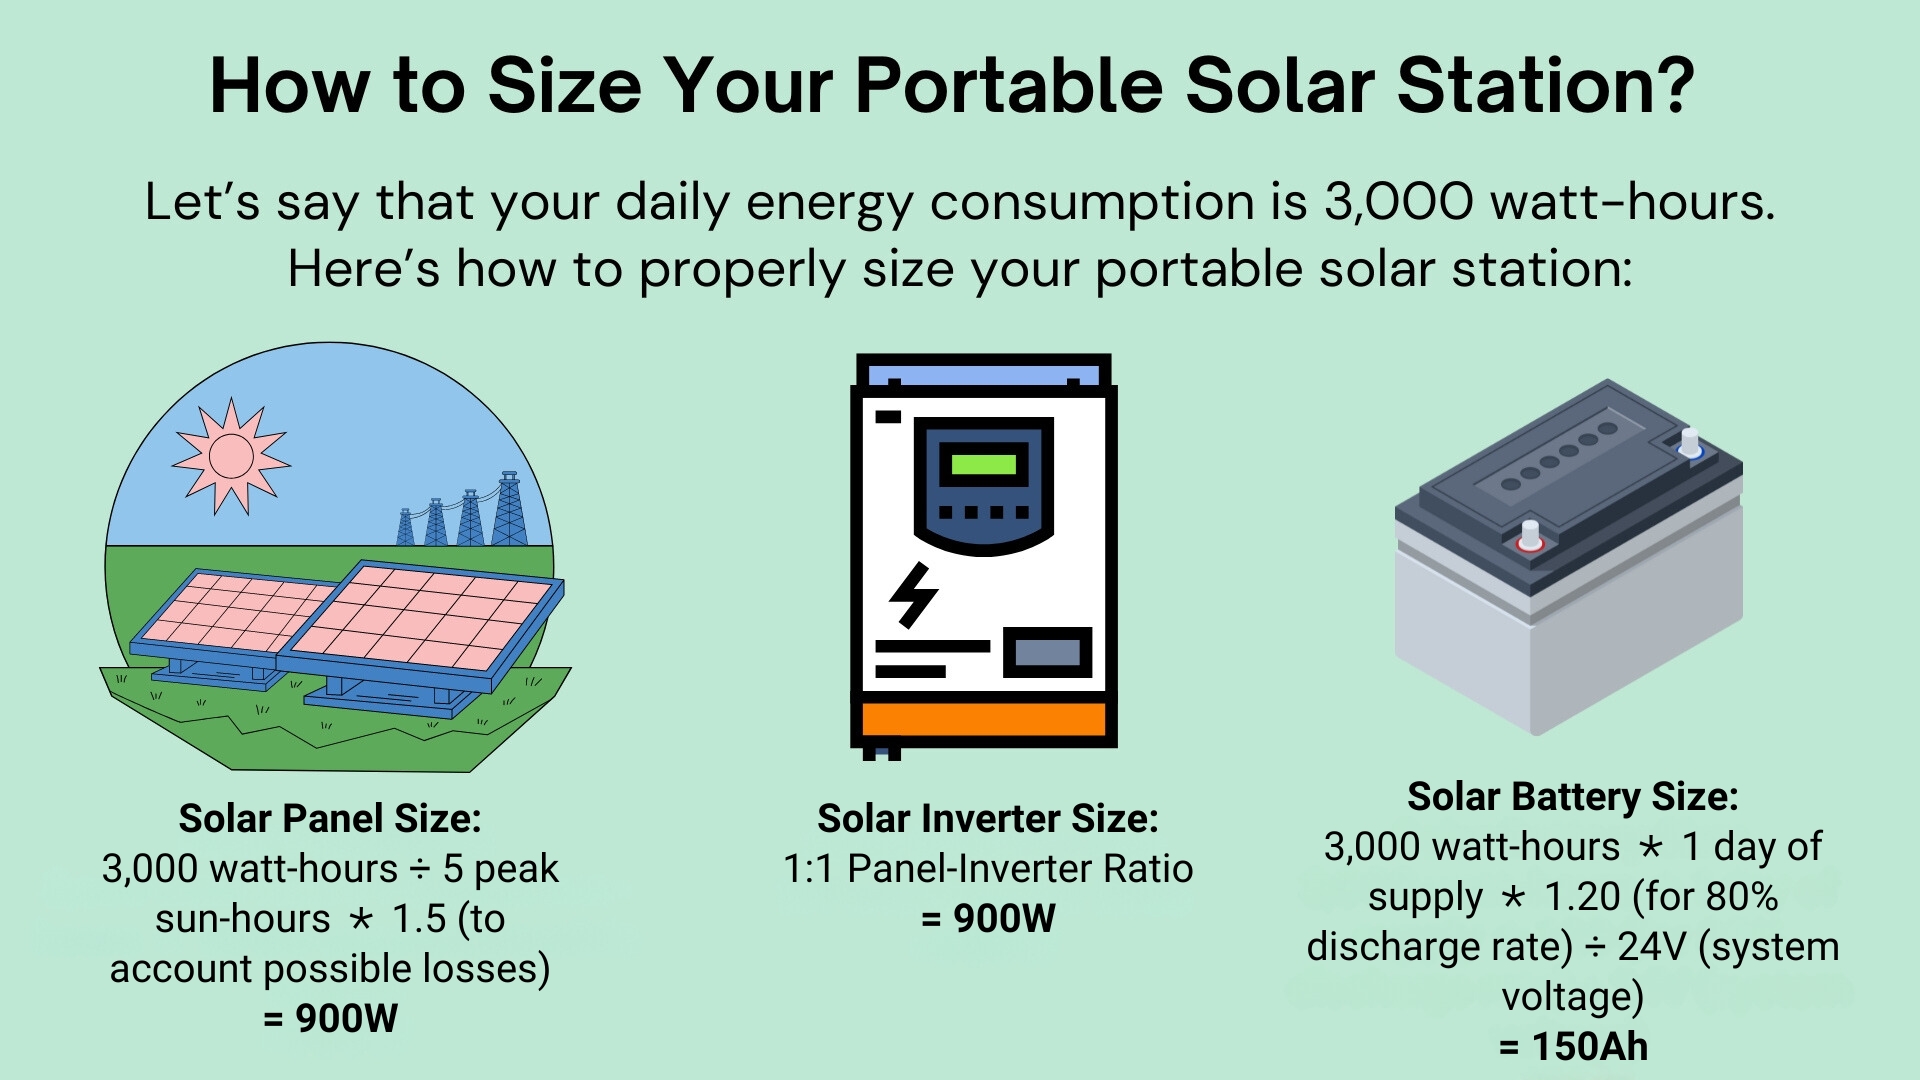 A visual guide on how to size a portable solar station properly.